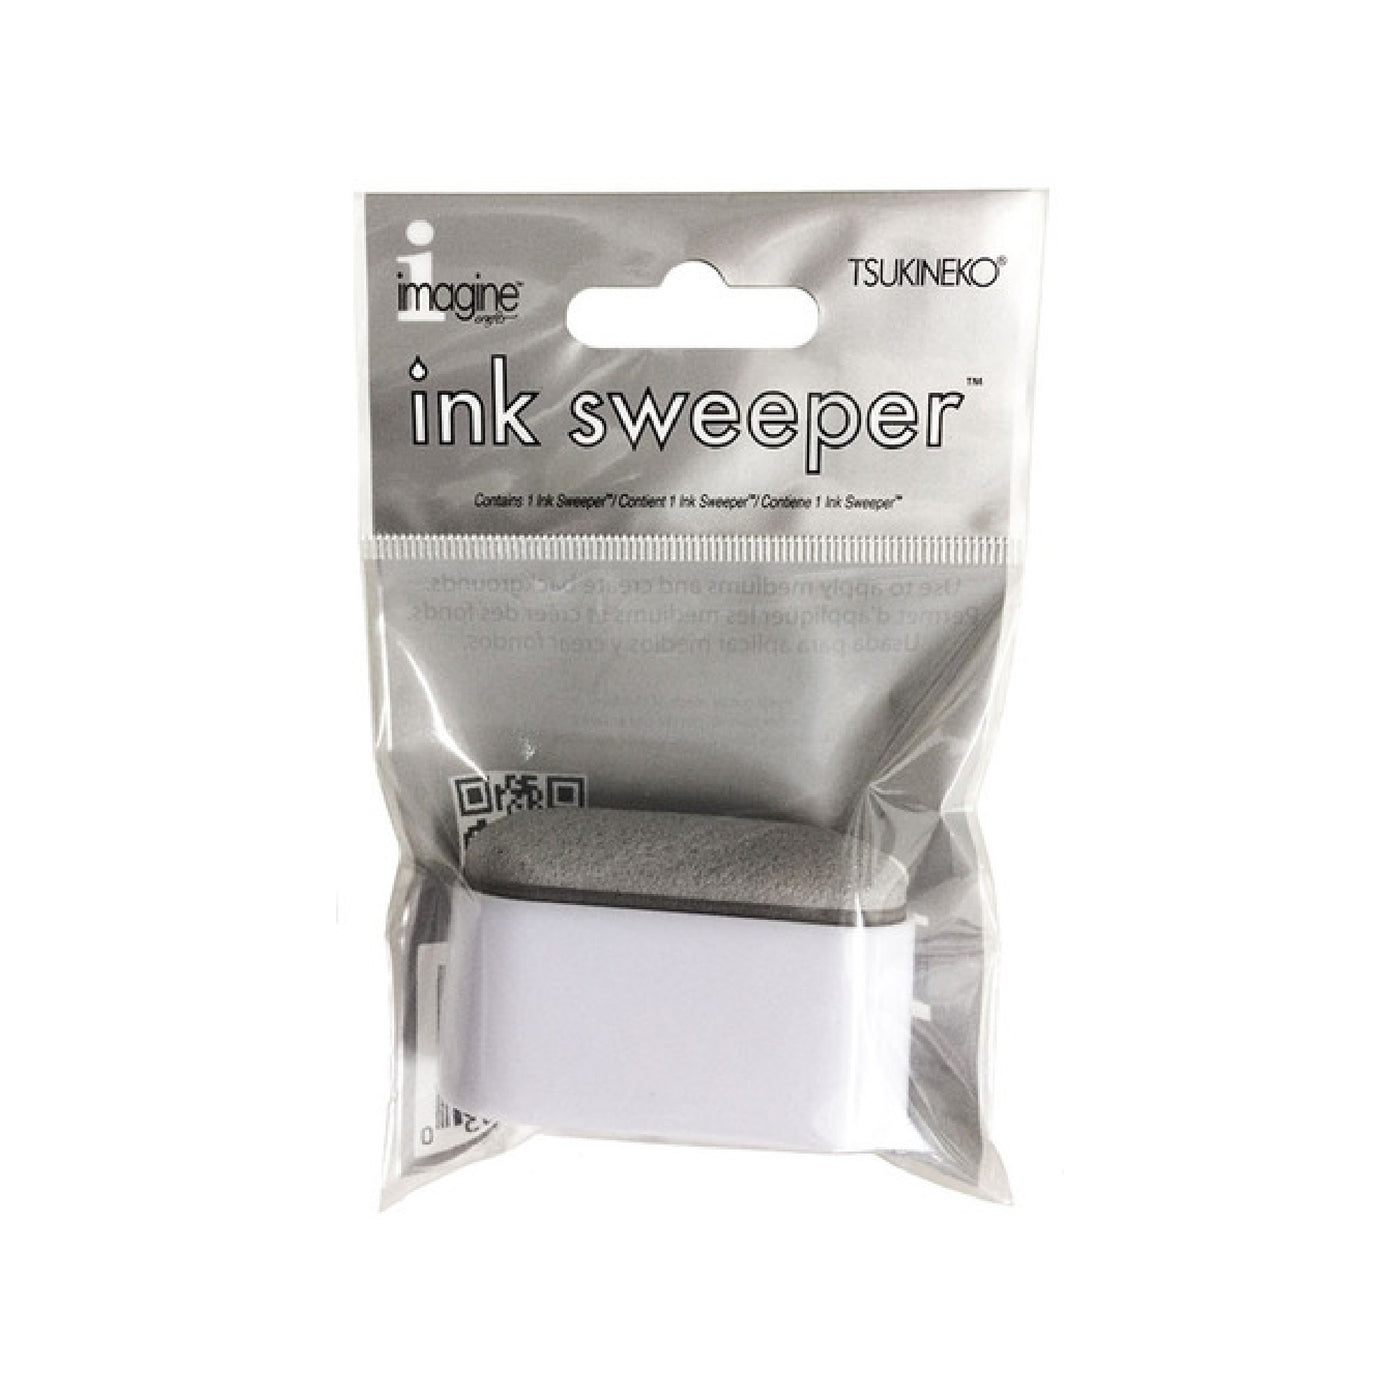 Tsukineko's ink sweeper is a quick and easy applicator for sweeping and spreading antiquing solutions, paints, stains, dyes, inks, and liquid adhesives